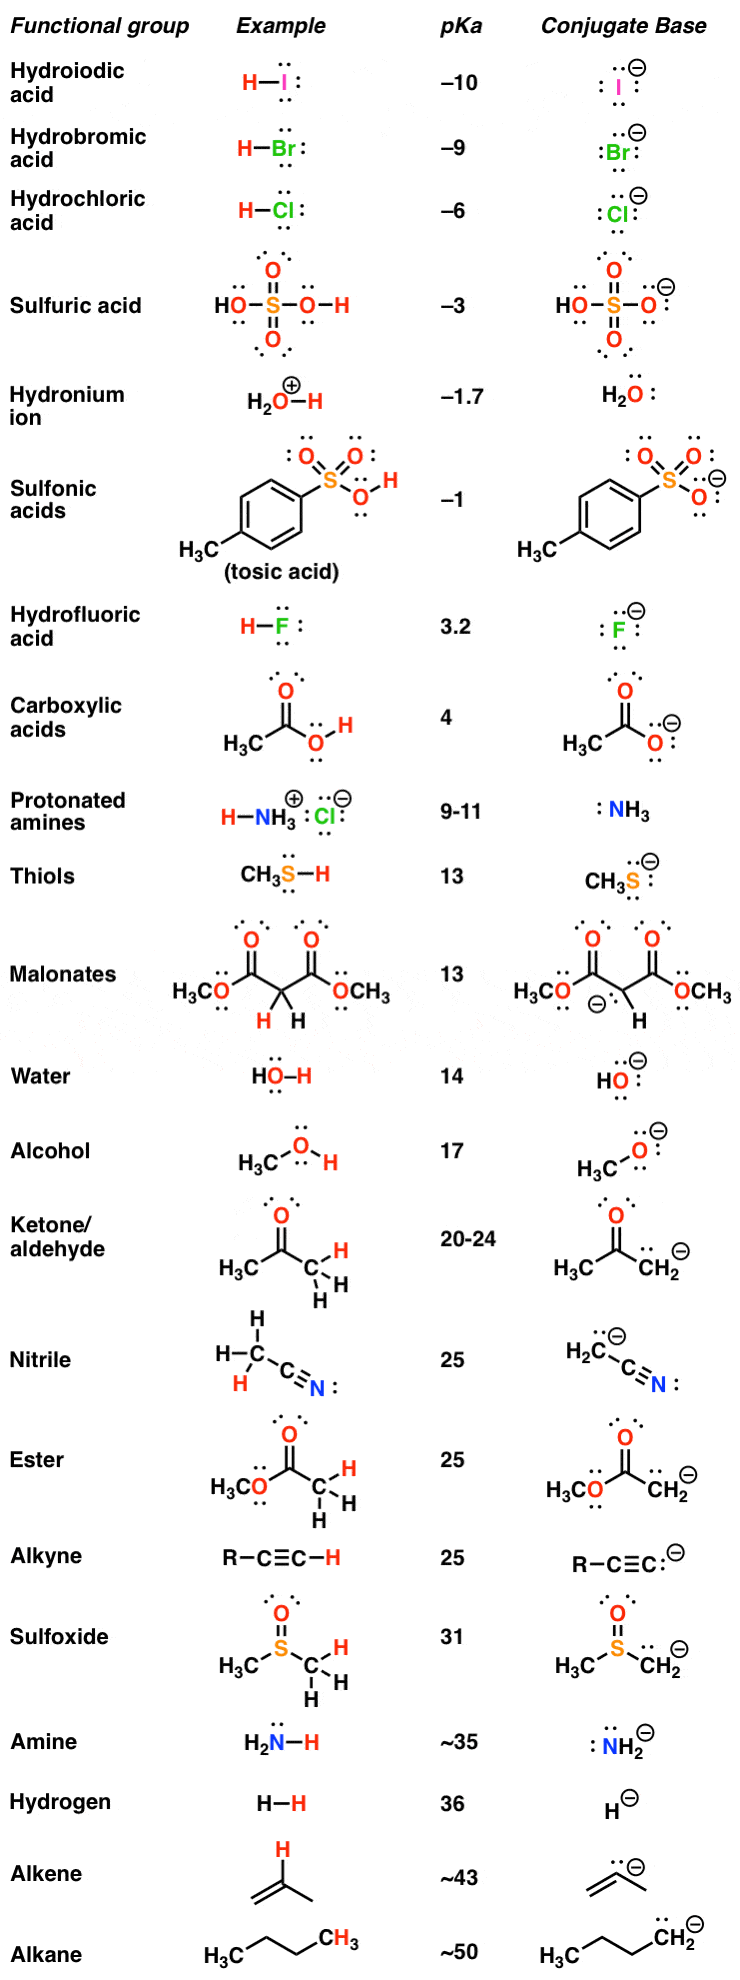 pka-table-with-strongest-acids-at-top-and-weakest-acids-at-bottom-showing-conjugate-bases